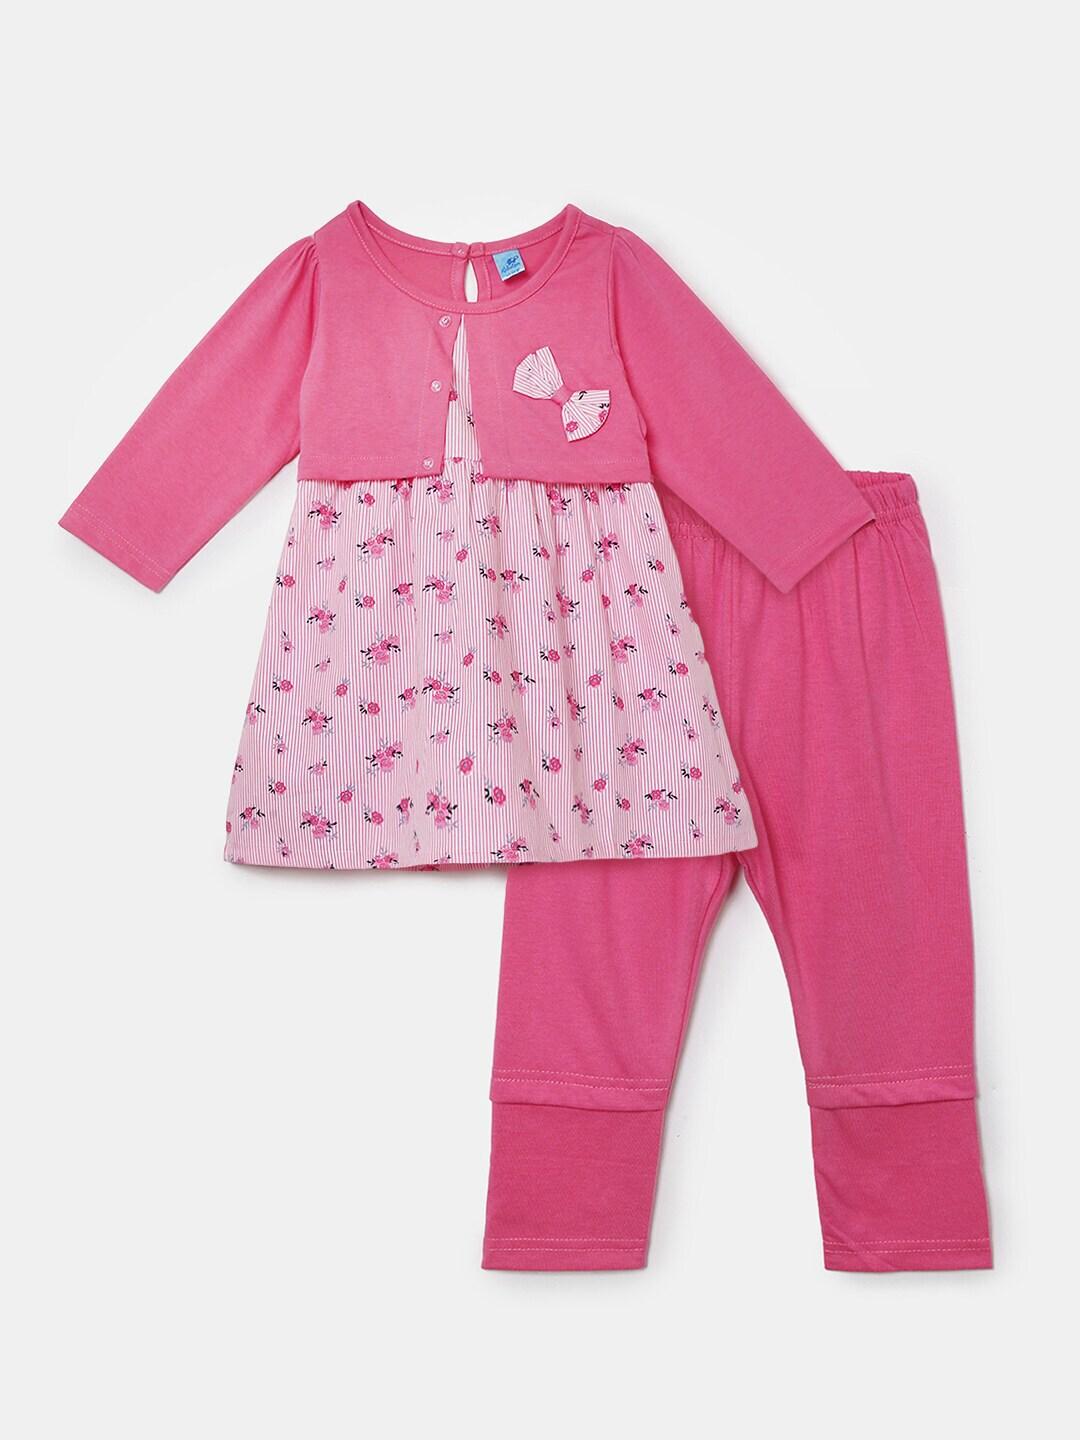 v-mart-kids-pink-&-white-printed-pure-cotton-top-with-pyjamas